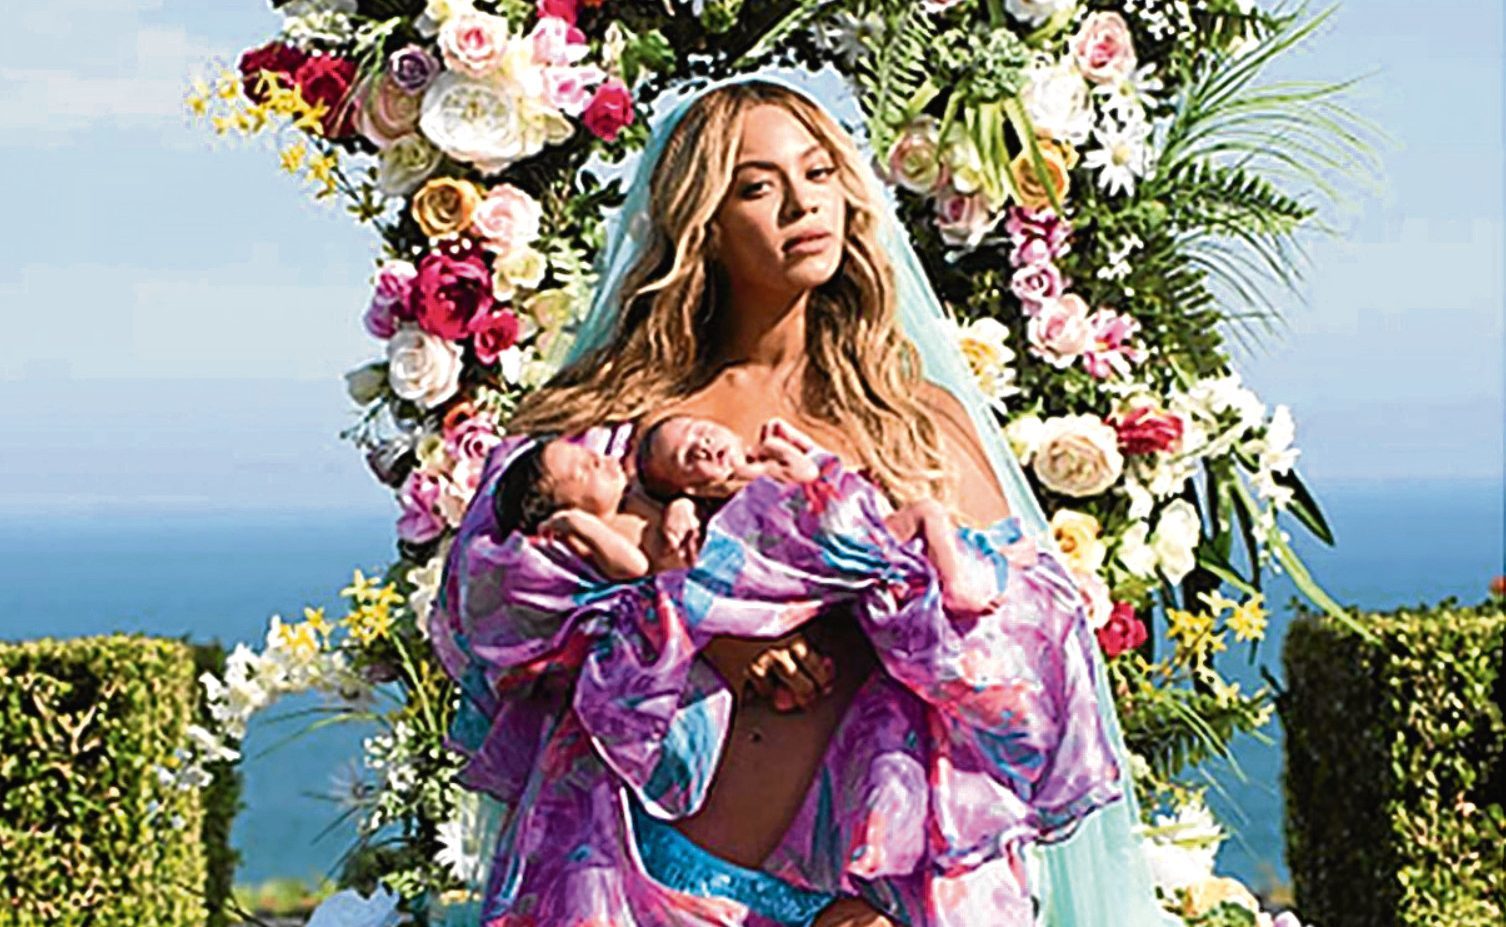 Beyonce showing off her twins "Sir Carter and Rumi" a month after she gave birth (Beyonce/Instagram)